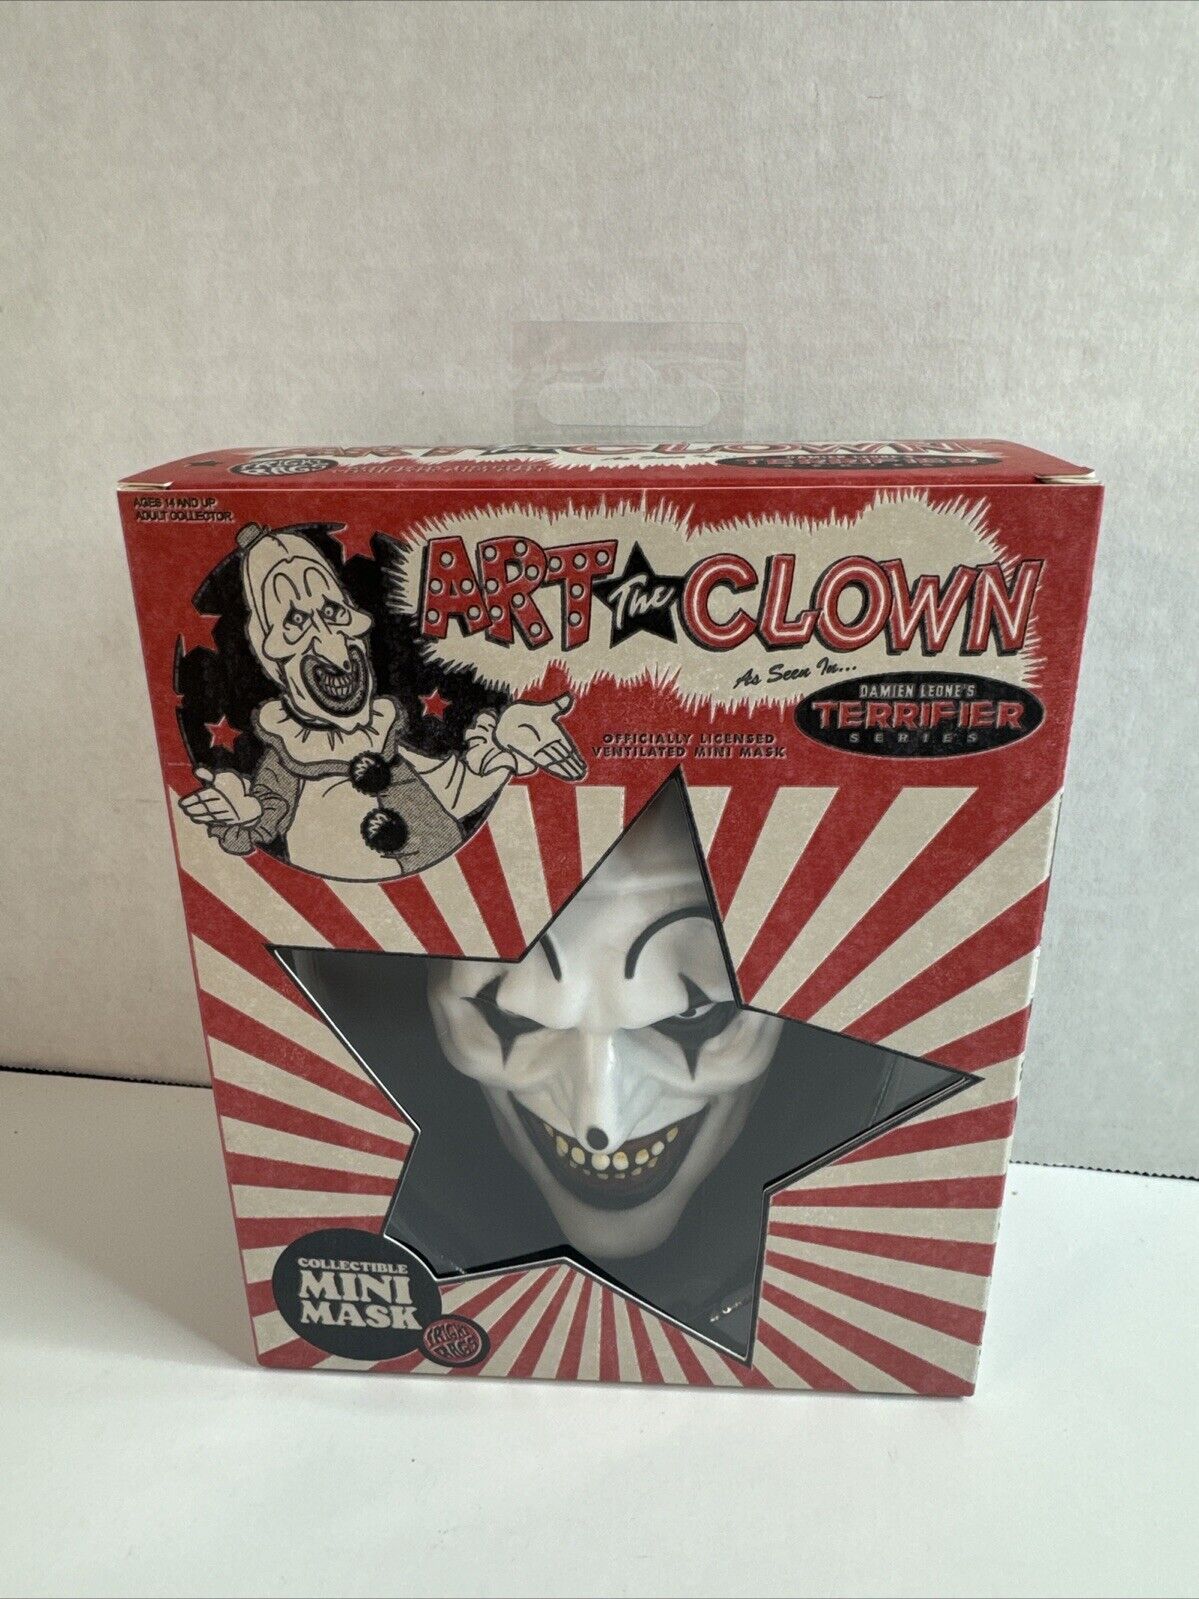 ART THE CLOWN TERRIFIER BY FRIGHT RAGS COLLECTIBLE MINI MASK